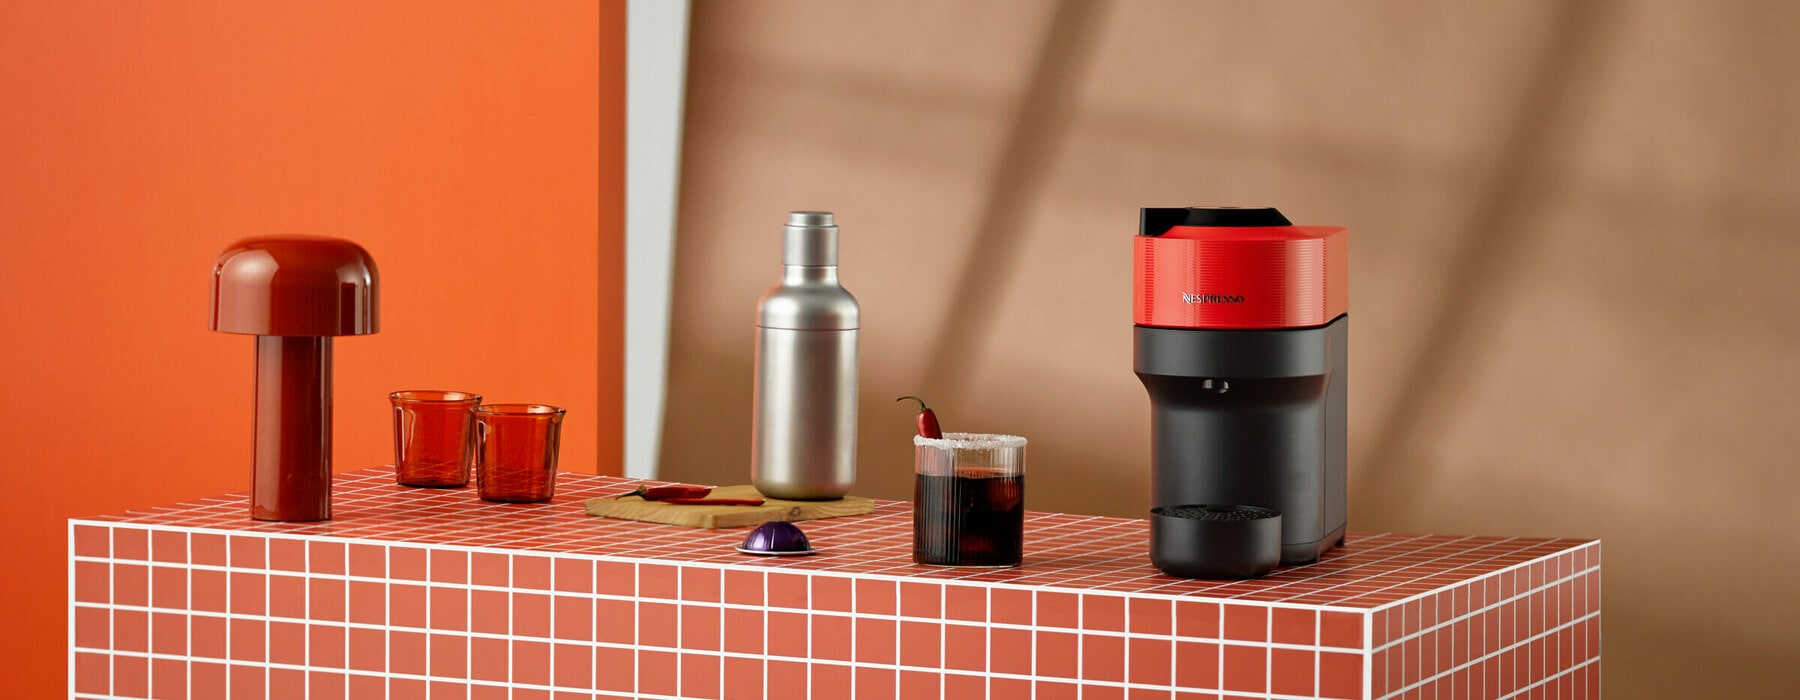 Elevate Your Desserts With The Nespresso Vertuo Pop - WOMAN